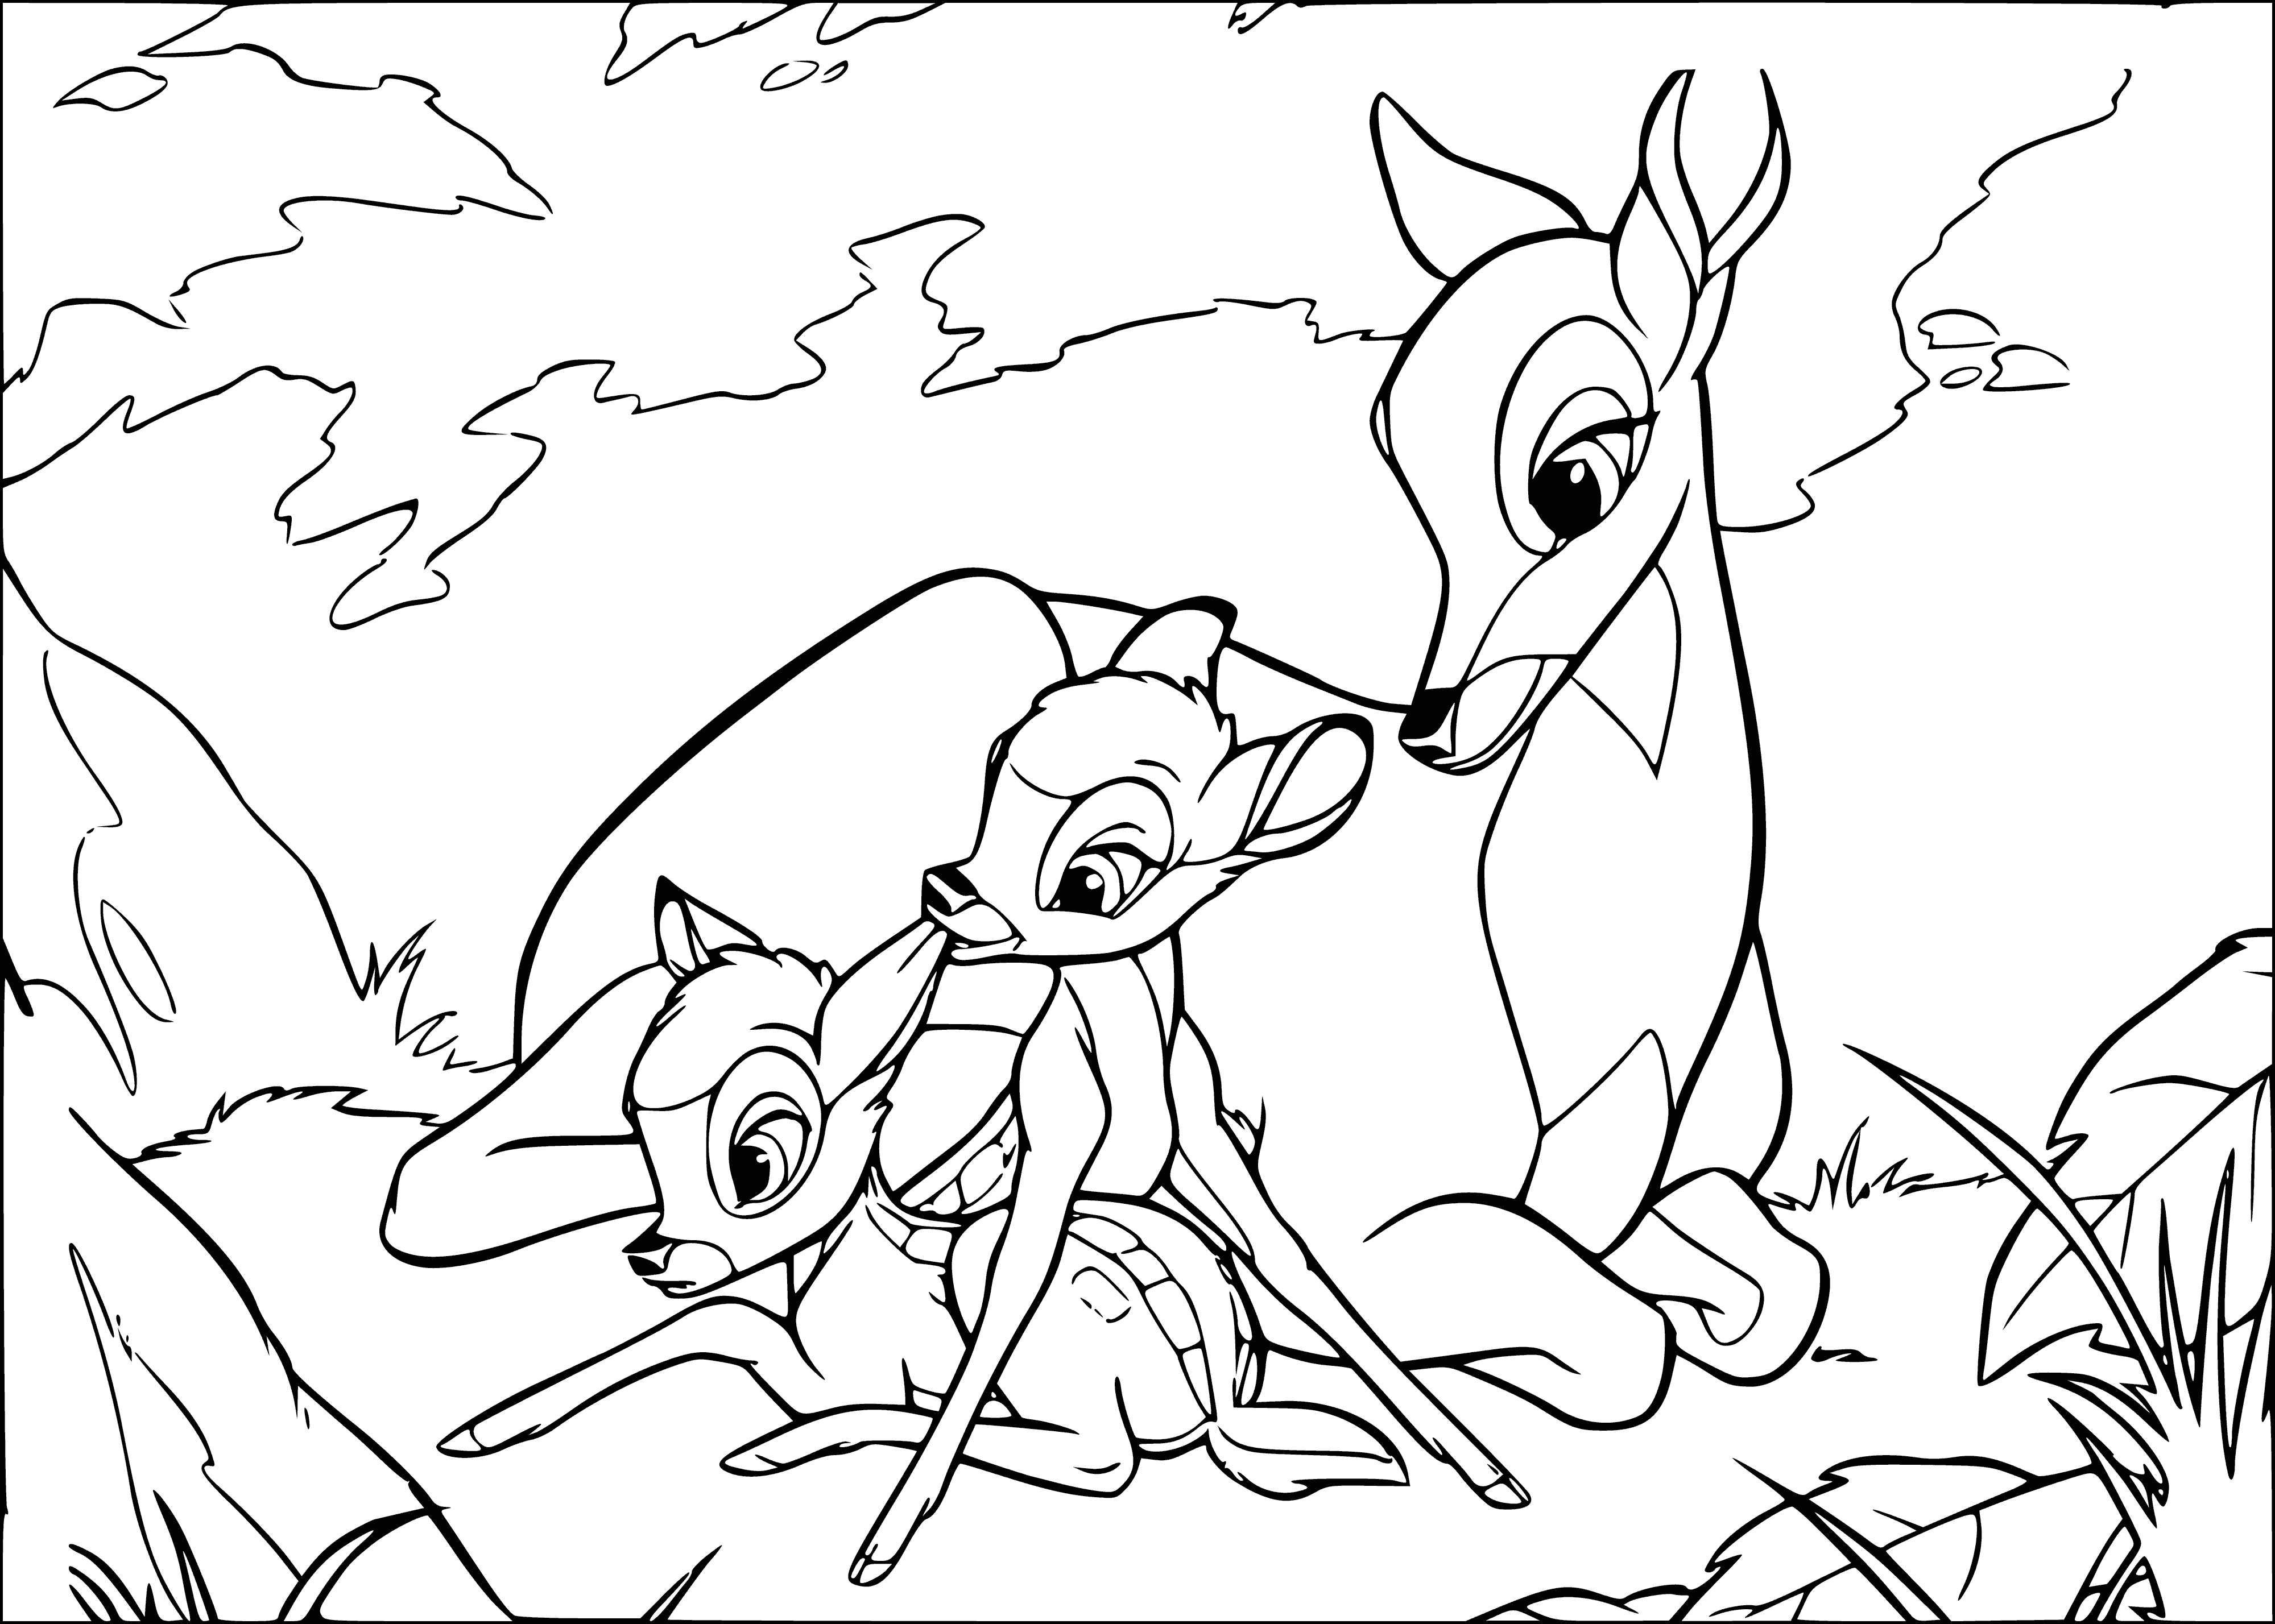 coloring page: Bambi and his mom share a tender moment in a tranquil, peaceful forest at dawn/dusk, surrounded by rustling leaves.